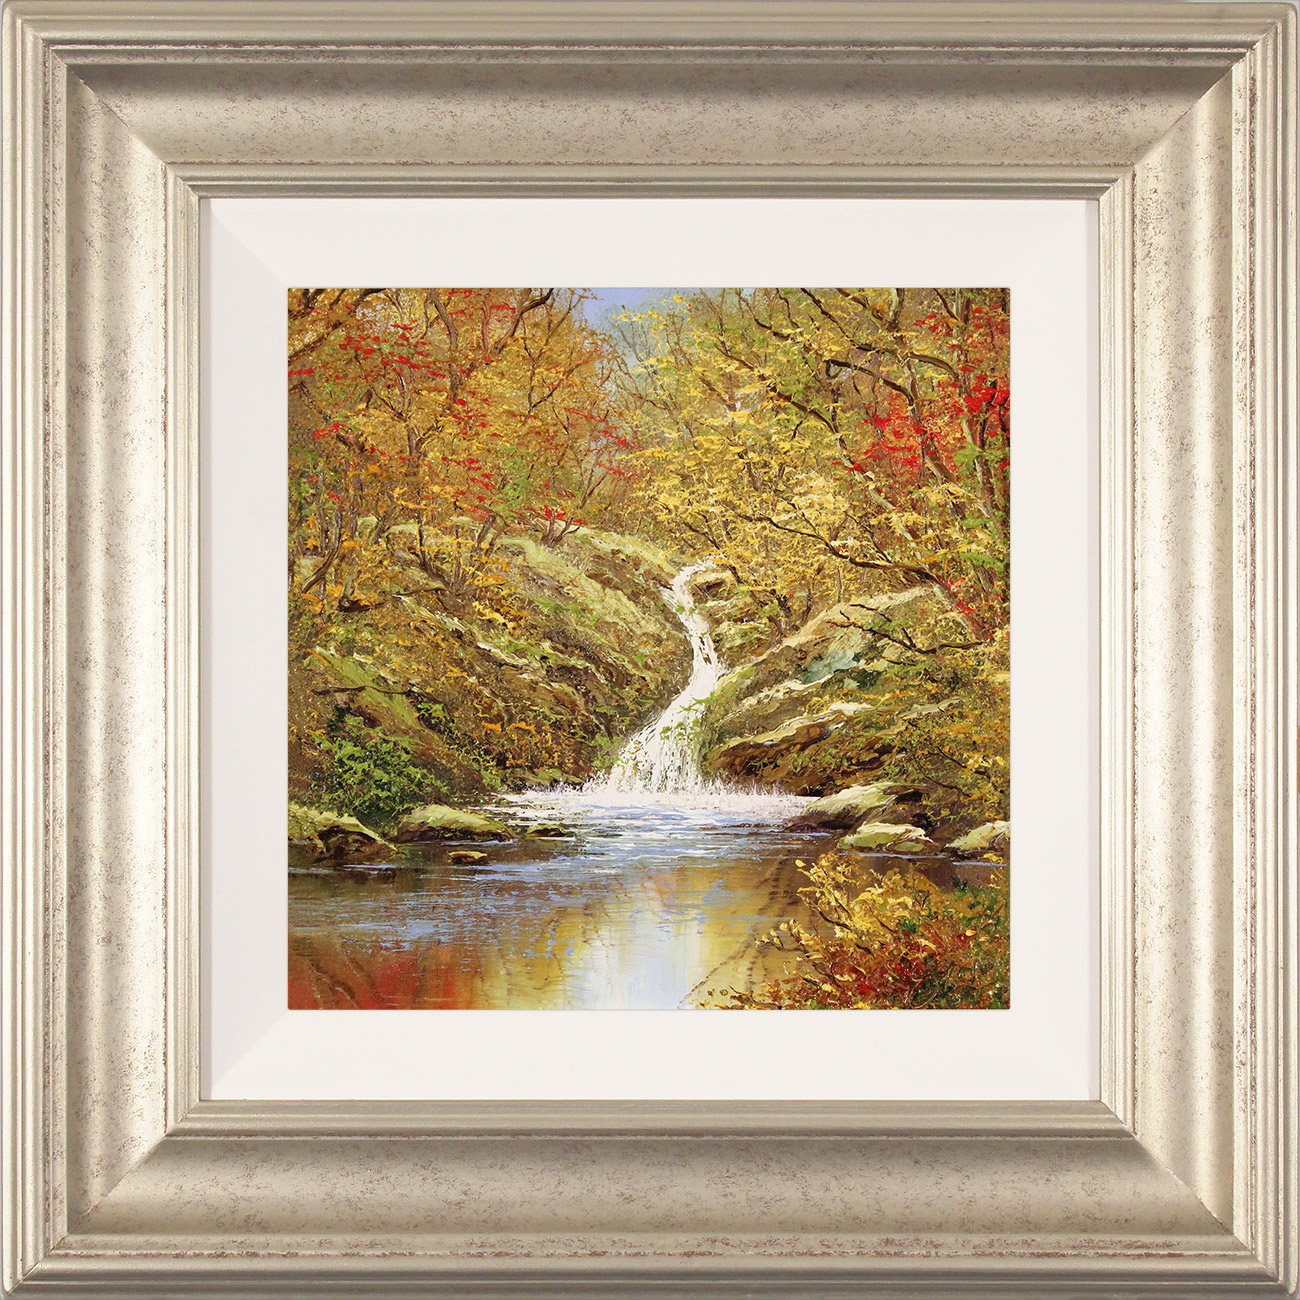 Terry Evans, Original oil painting on canvas, Autumn Falls. Click to enlarge